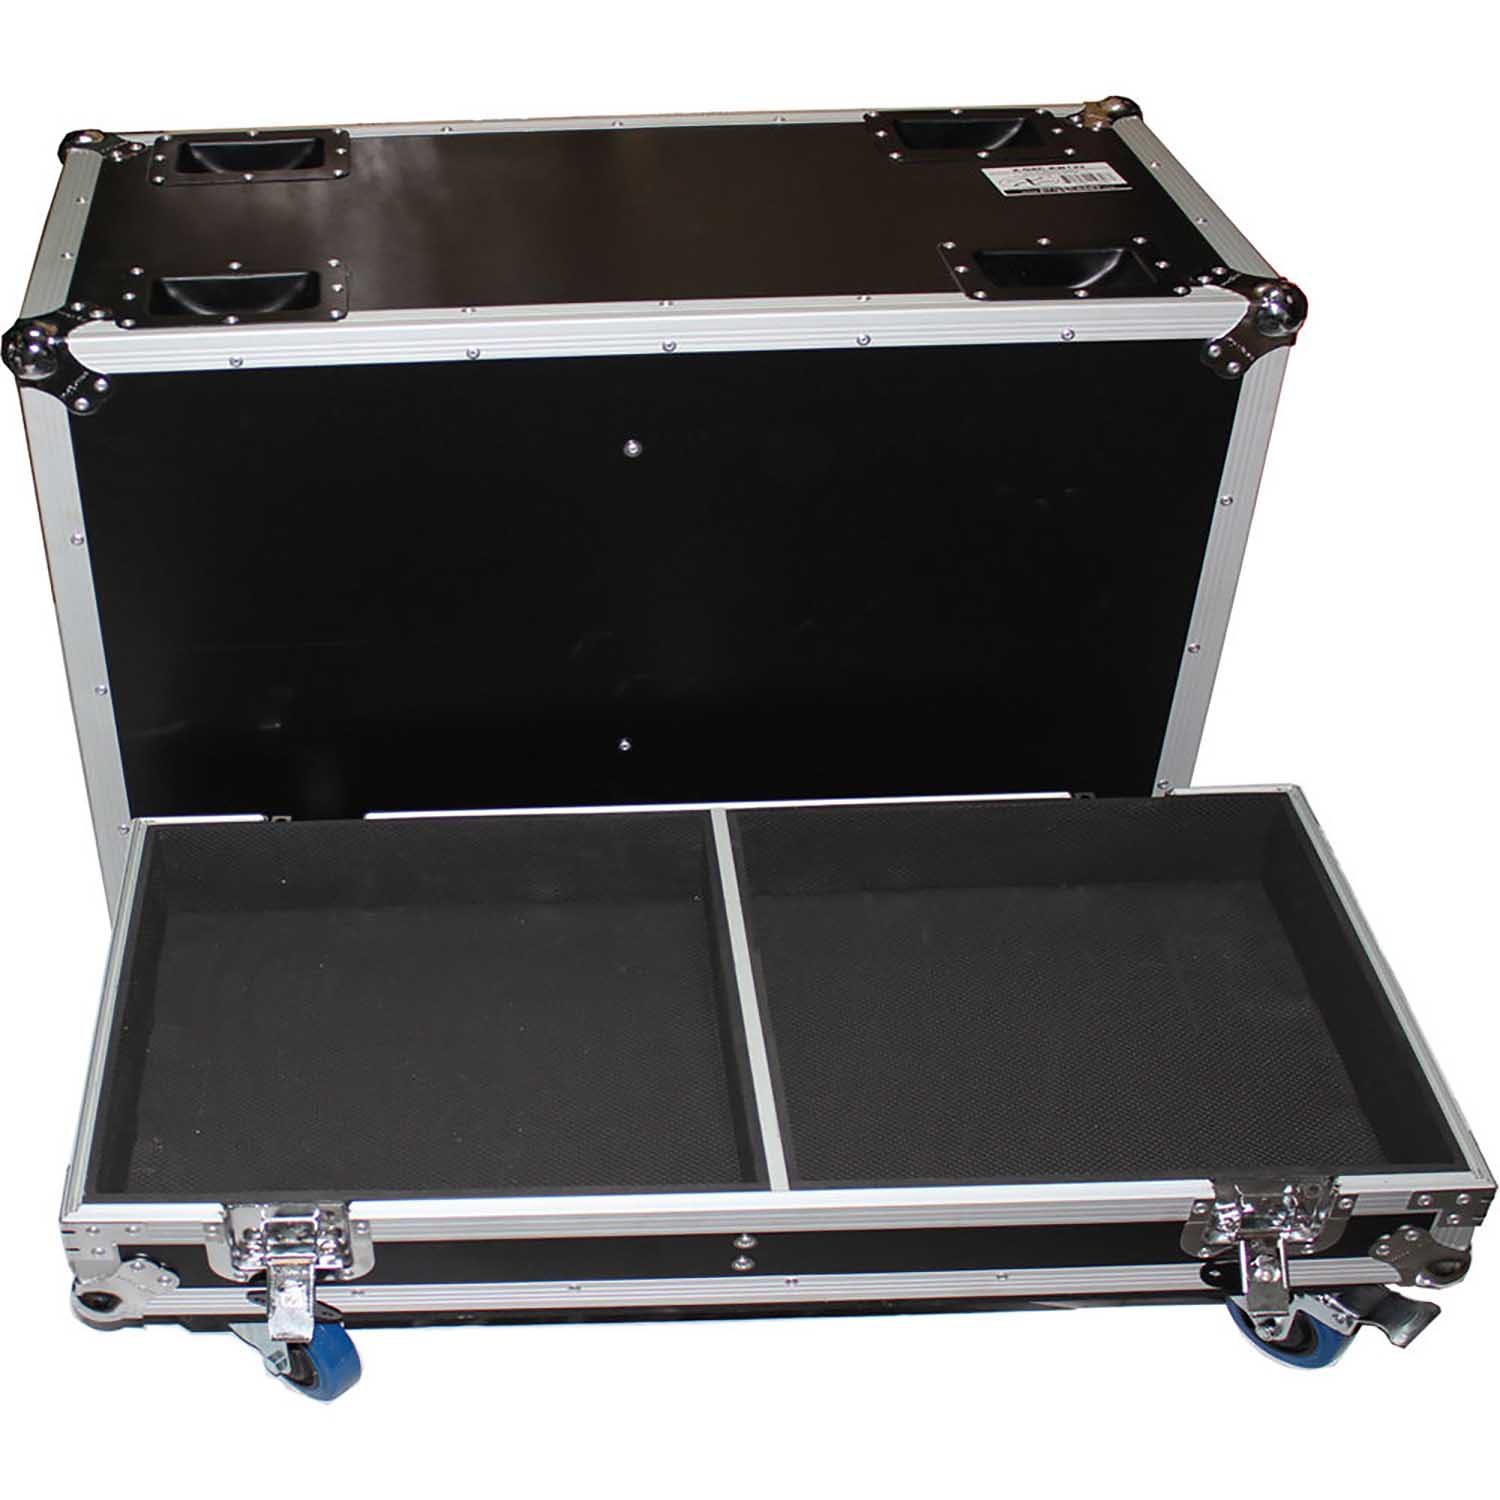 ProX X-QSC-KW122 Dual ATA Style Speaker Flight Case for QSC KW122 Speakers Holds 2 - Hollywood DJ